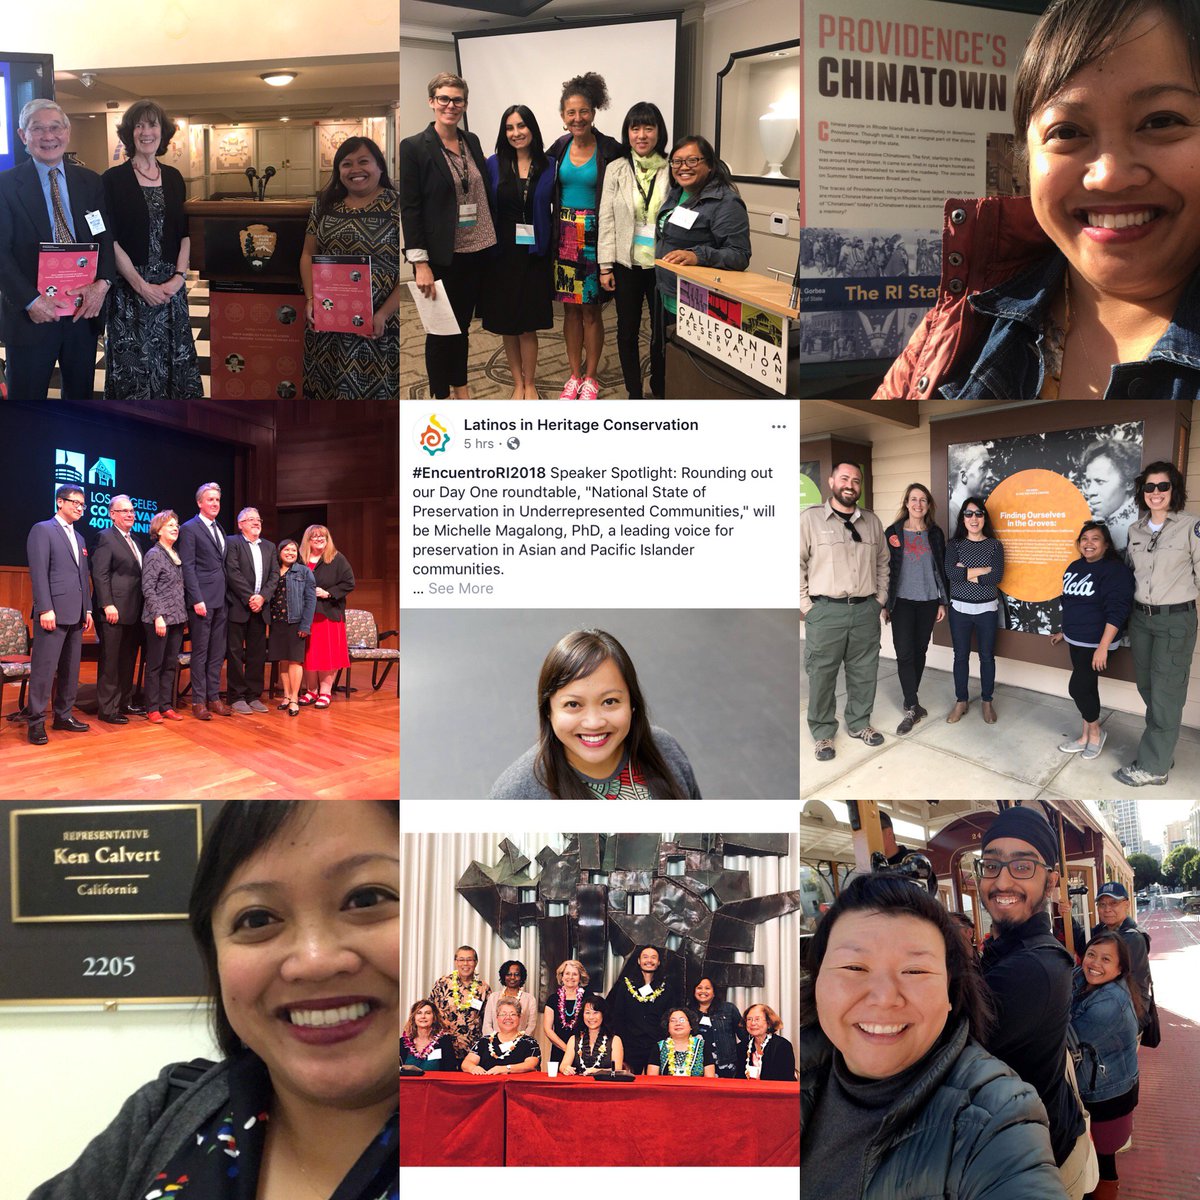 Looking Back at 2018 and Looking Forward to 2019 – Reflections from APIAHiP’s Executive Director mailchi.mp/11f1fd1ad3ed/a…